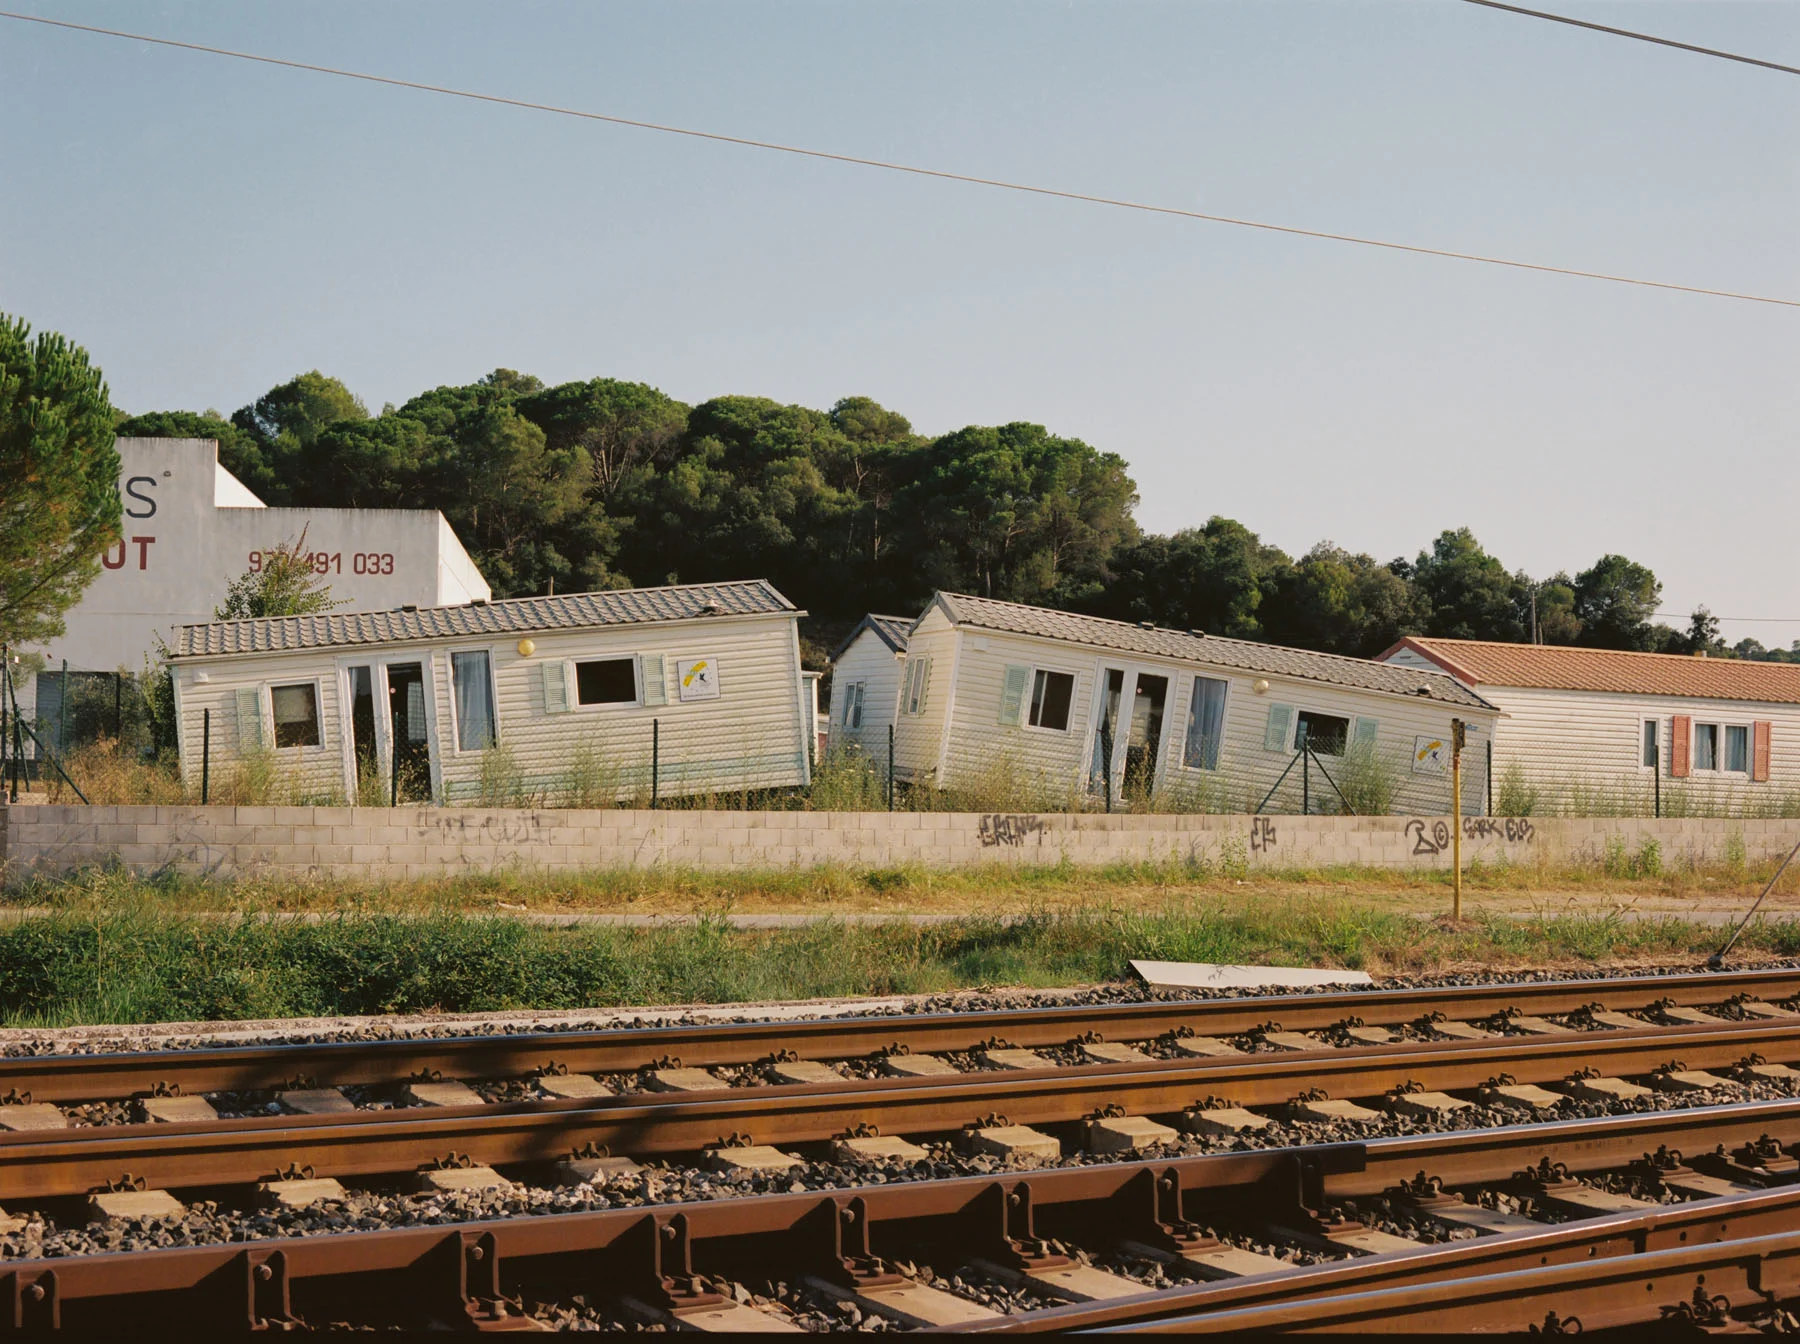 A photograph of four crooked and abandoned portable homes lying in the background between trees and vegetation. An old and rusty railroad is visible in the foreground.